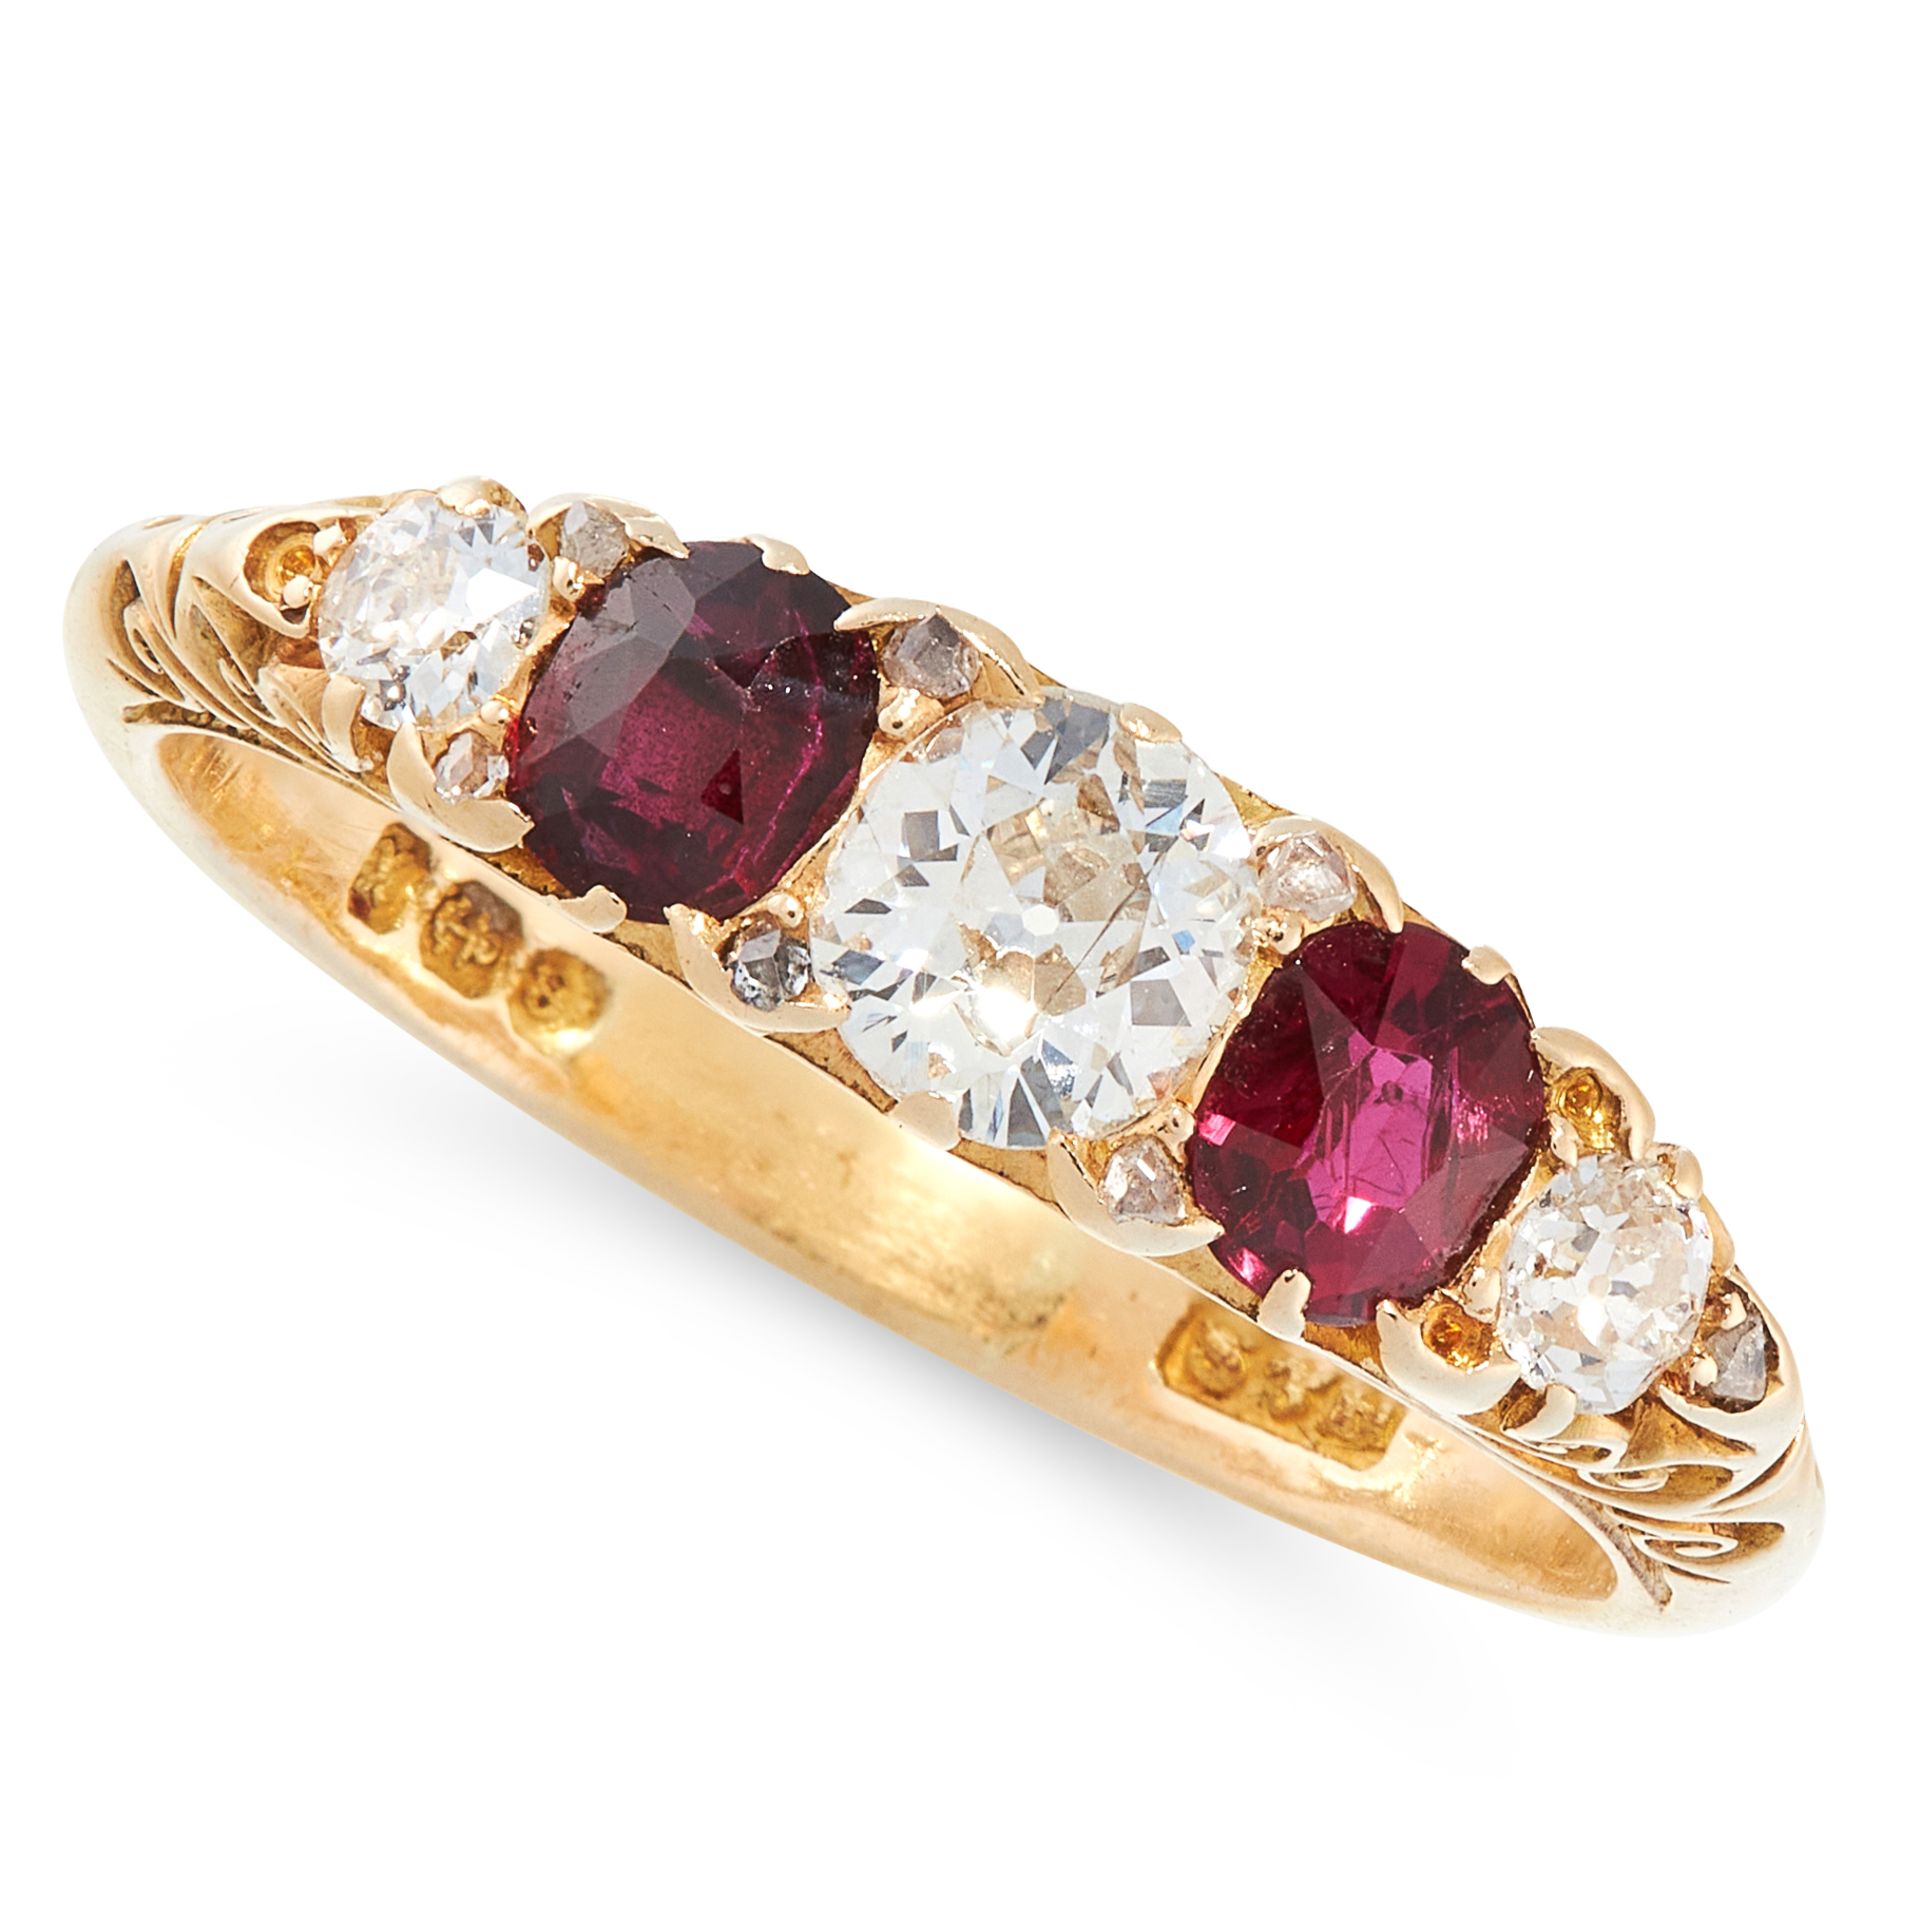 AN ANTIQUE VICTORIAN DIAMOND AND RUBY DRESS RING, 1897 in 18ct yellow gold, set with a trio of